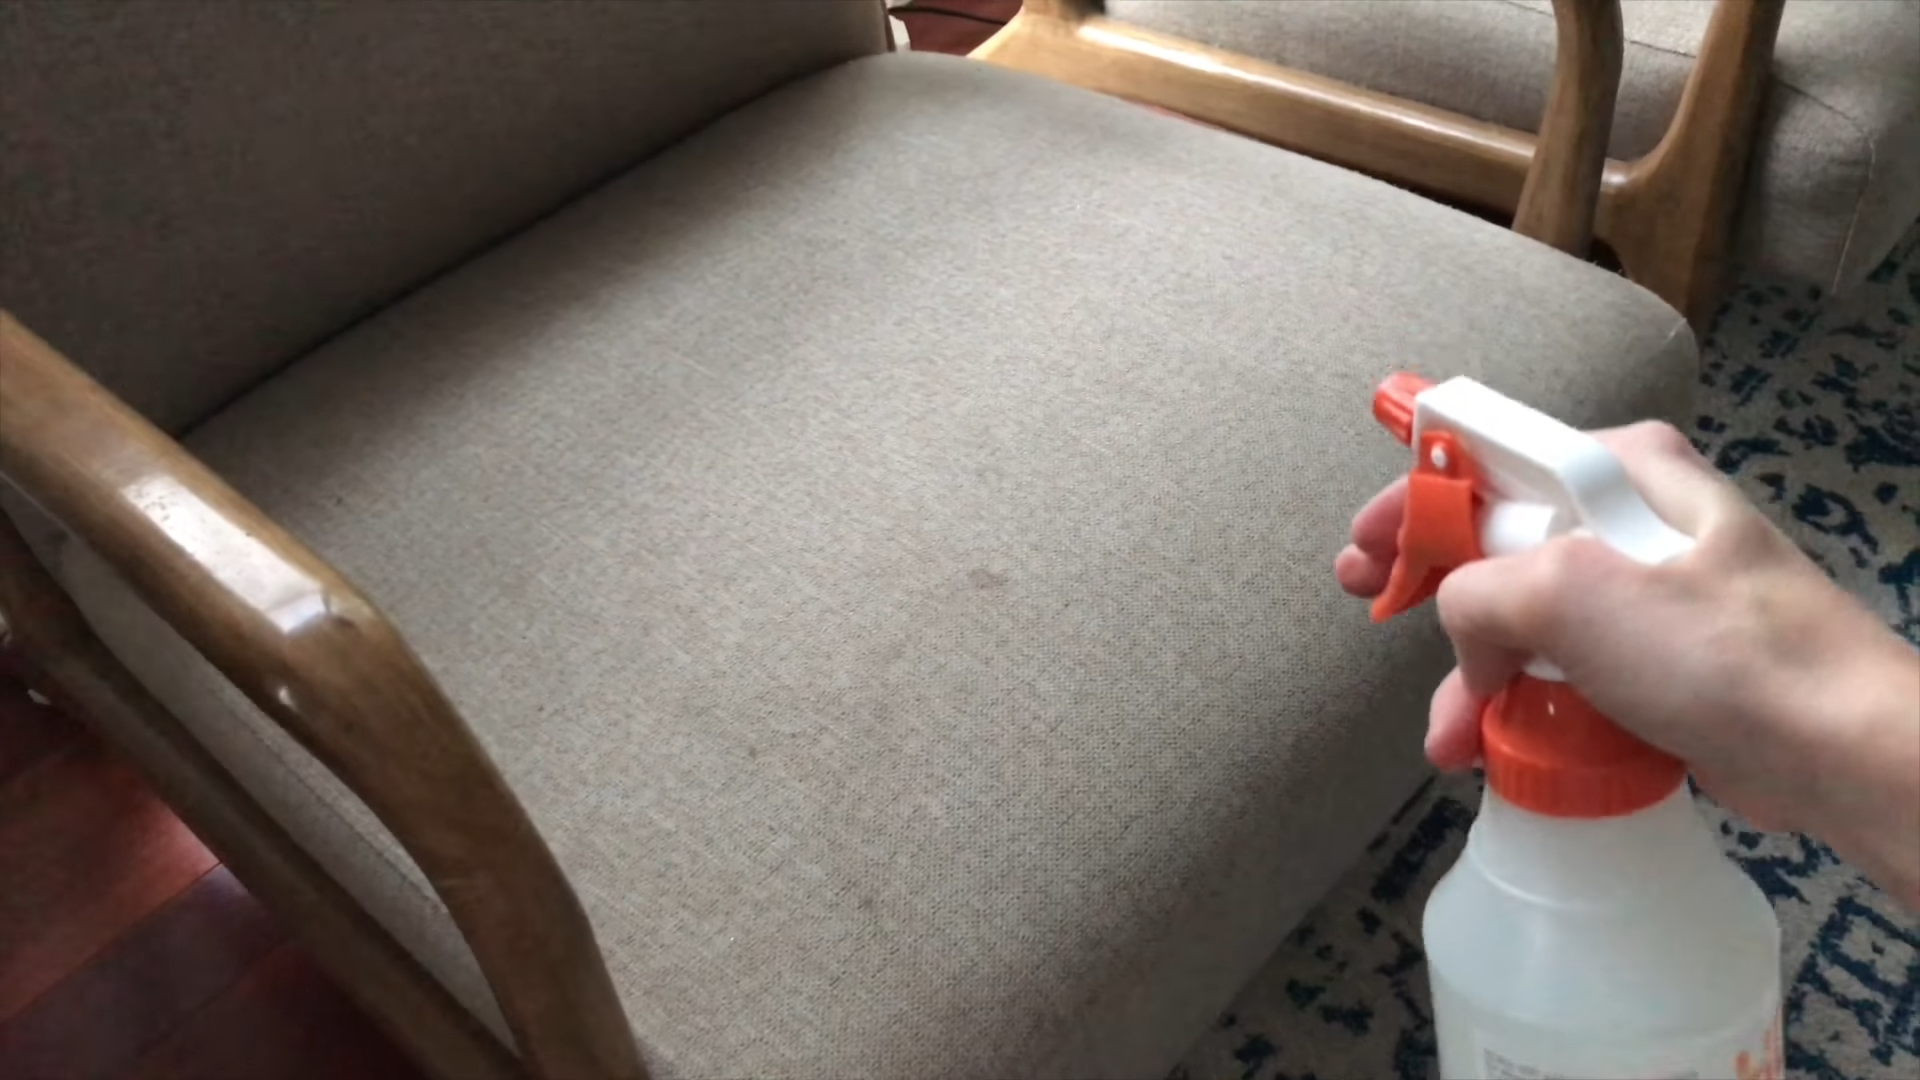 How do you clean upholstery fabric